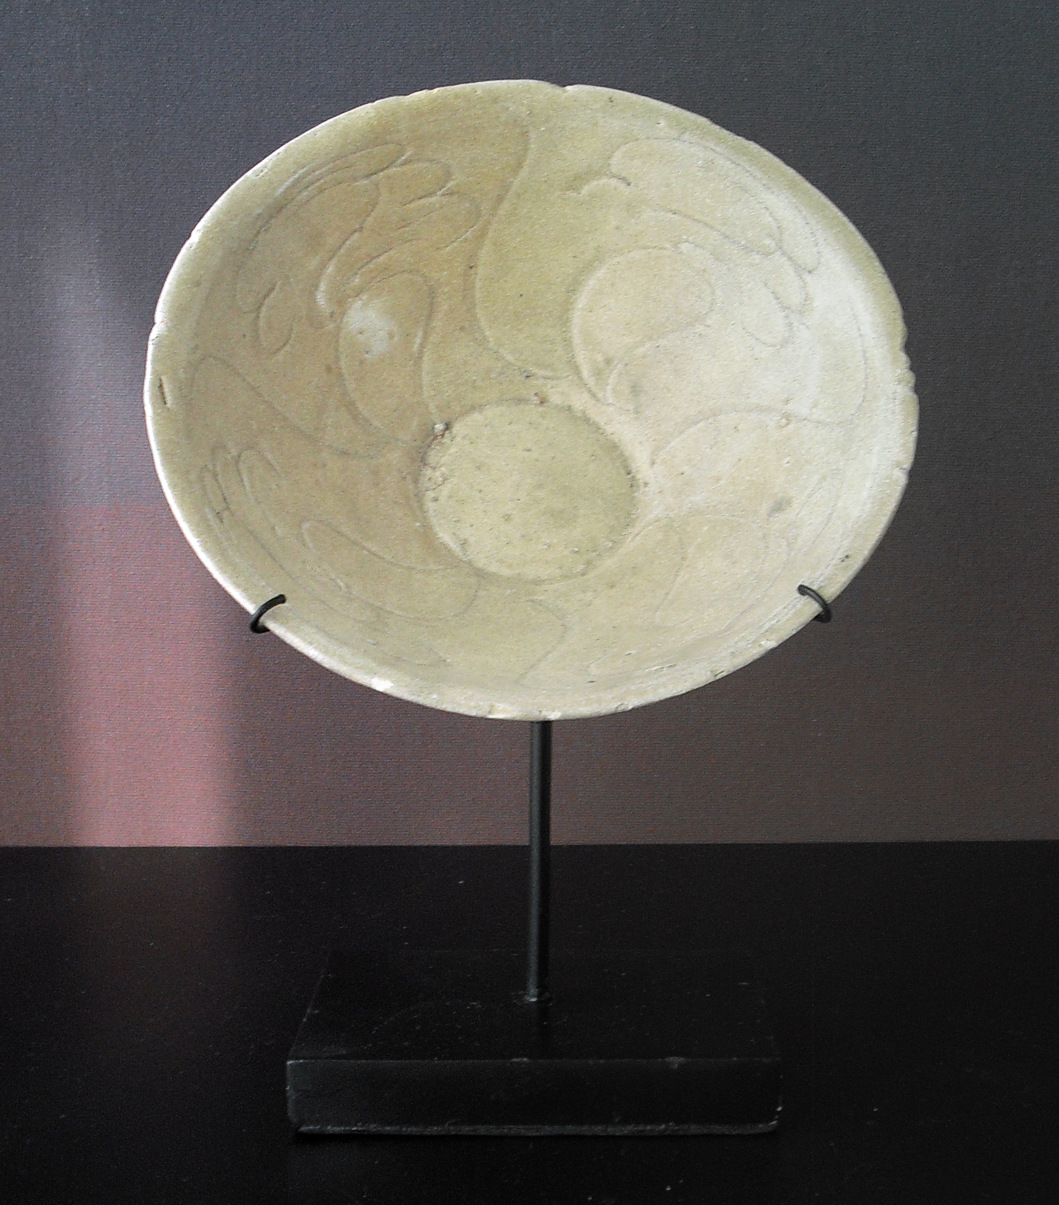 12th C. Northern Song Bowl - Carved